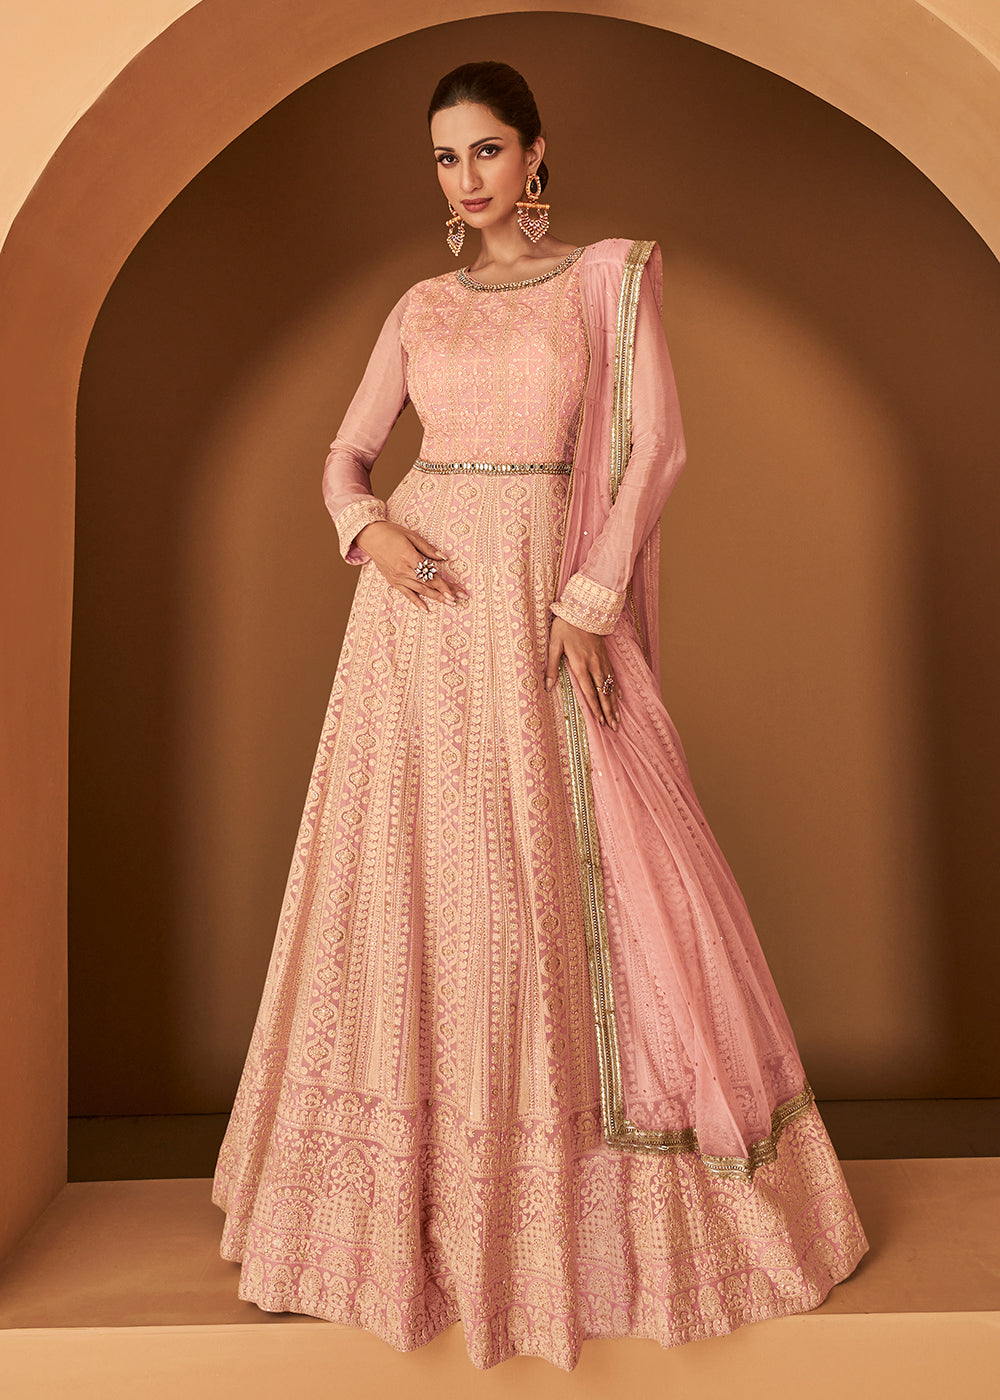 Buy Now Georgette Pretty Peach Embroidered Designer Wedding Gown Online in USA, UK, Australia, Canada & Worldwide at Empress Clothing. 